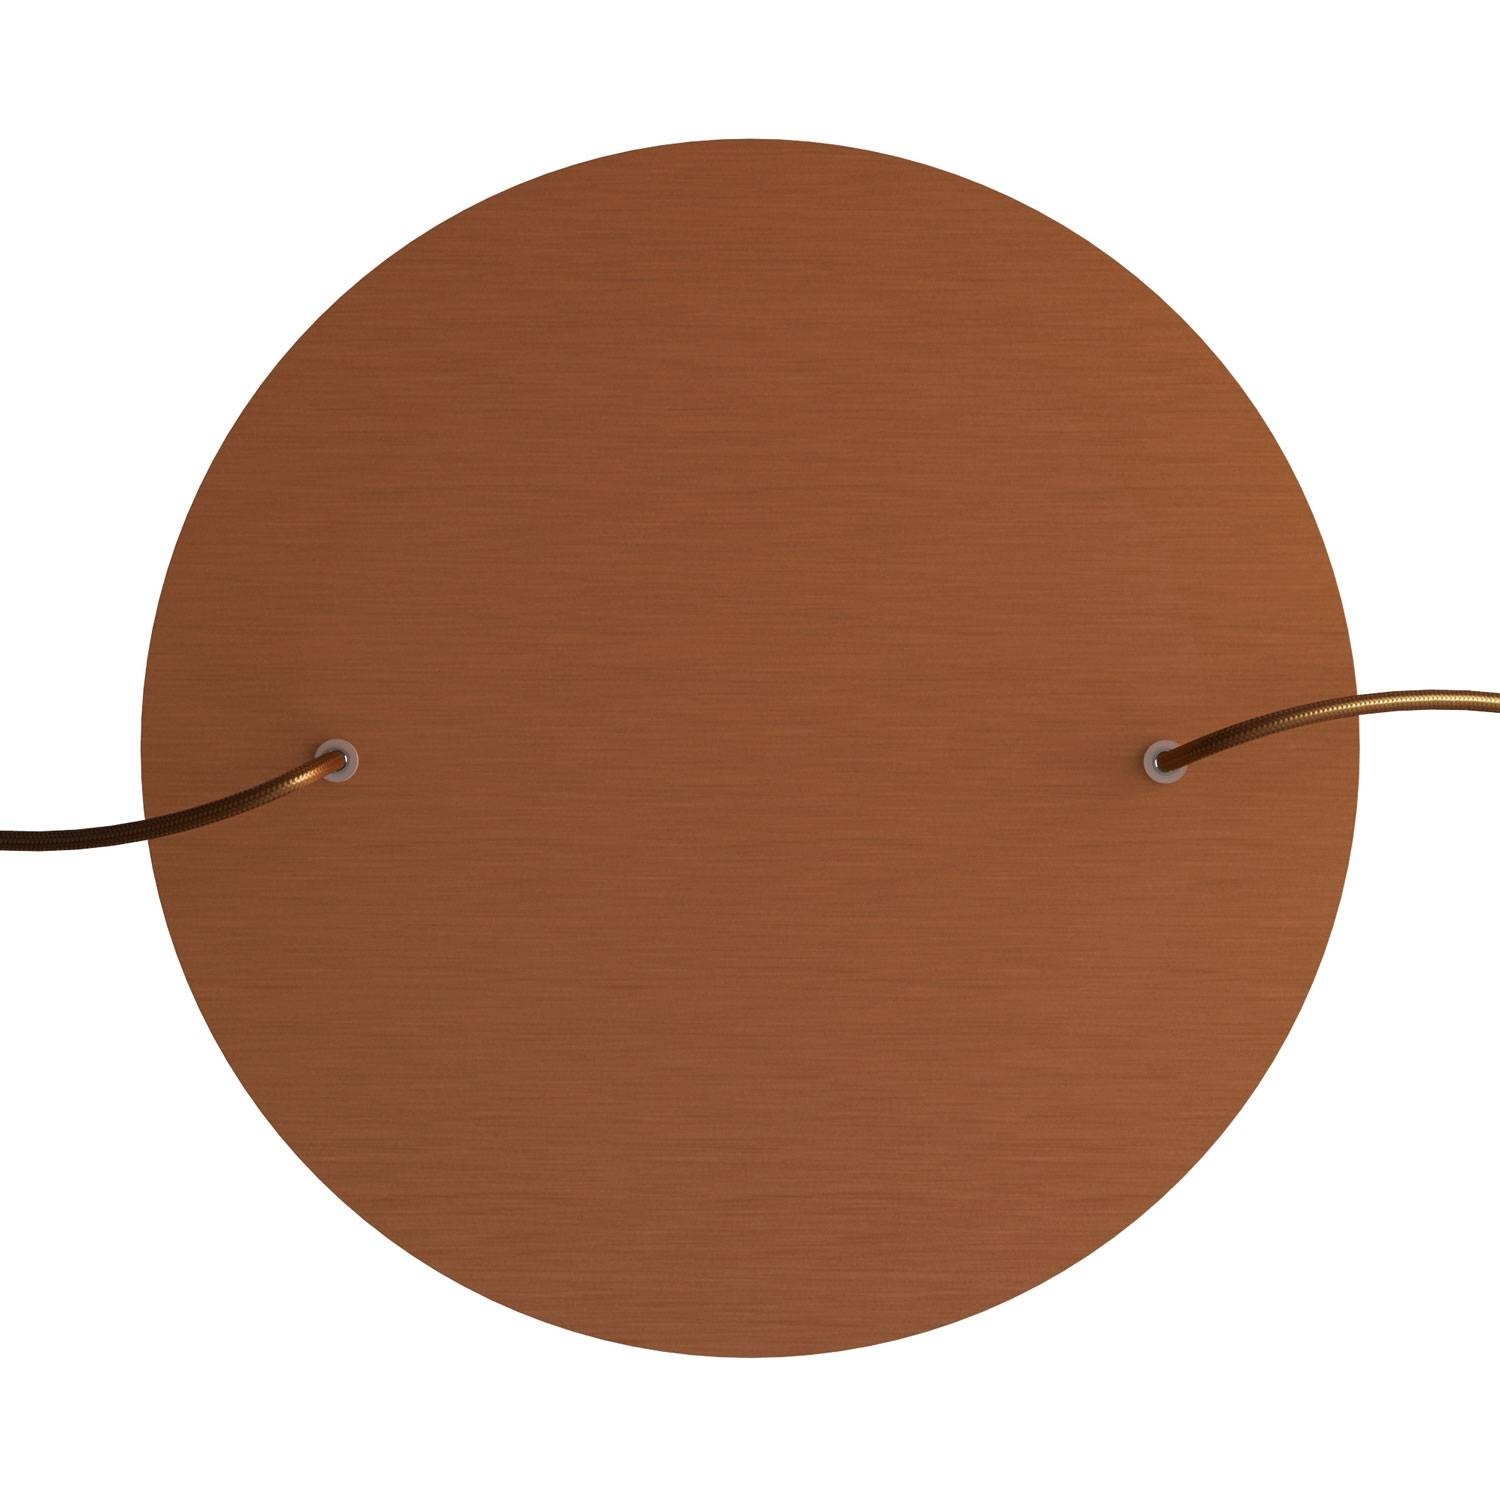 2 Holes - EXTRA LARGE Round Ceiling Canopy Kit - Rose One System